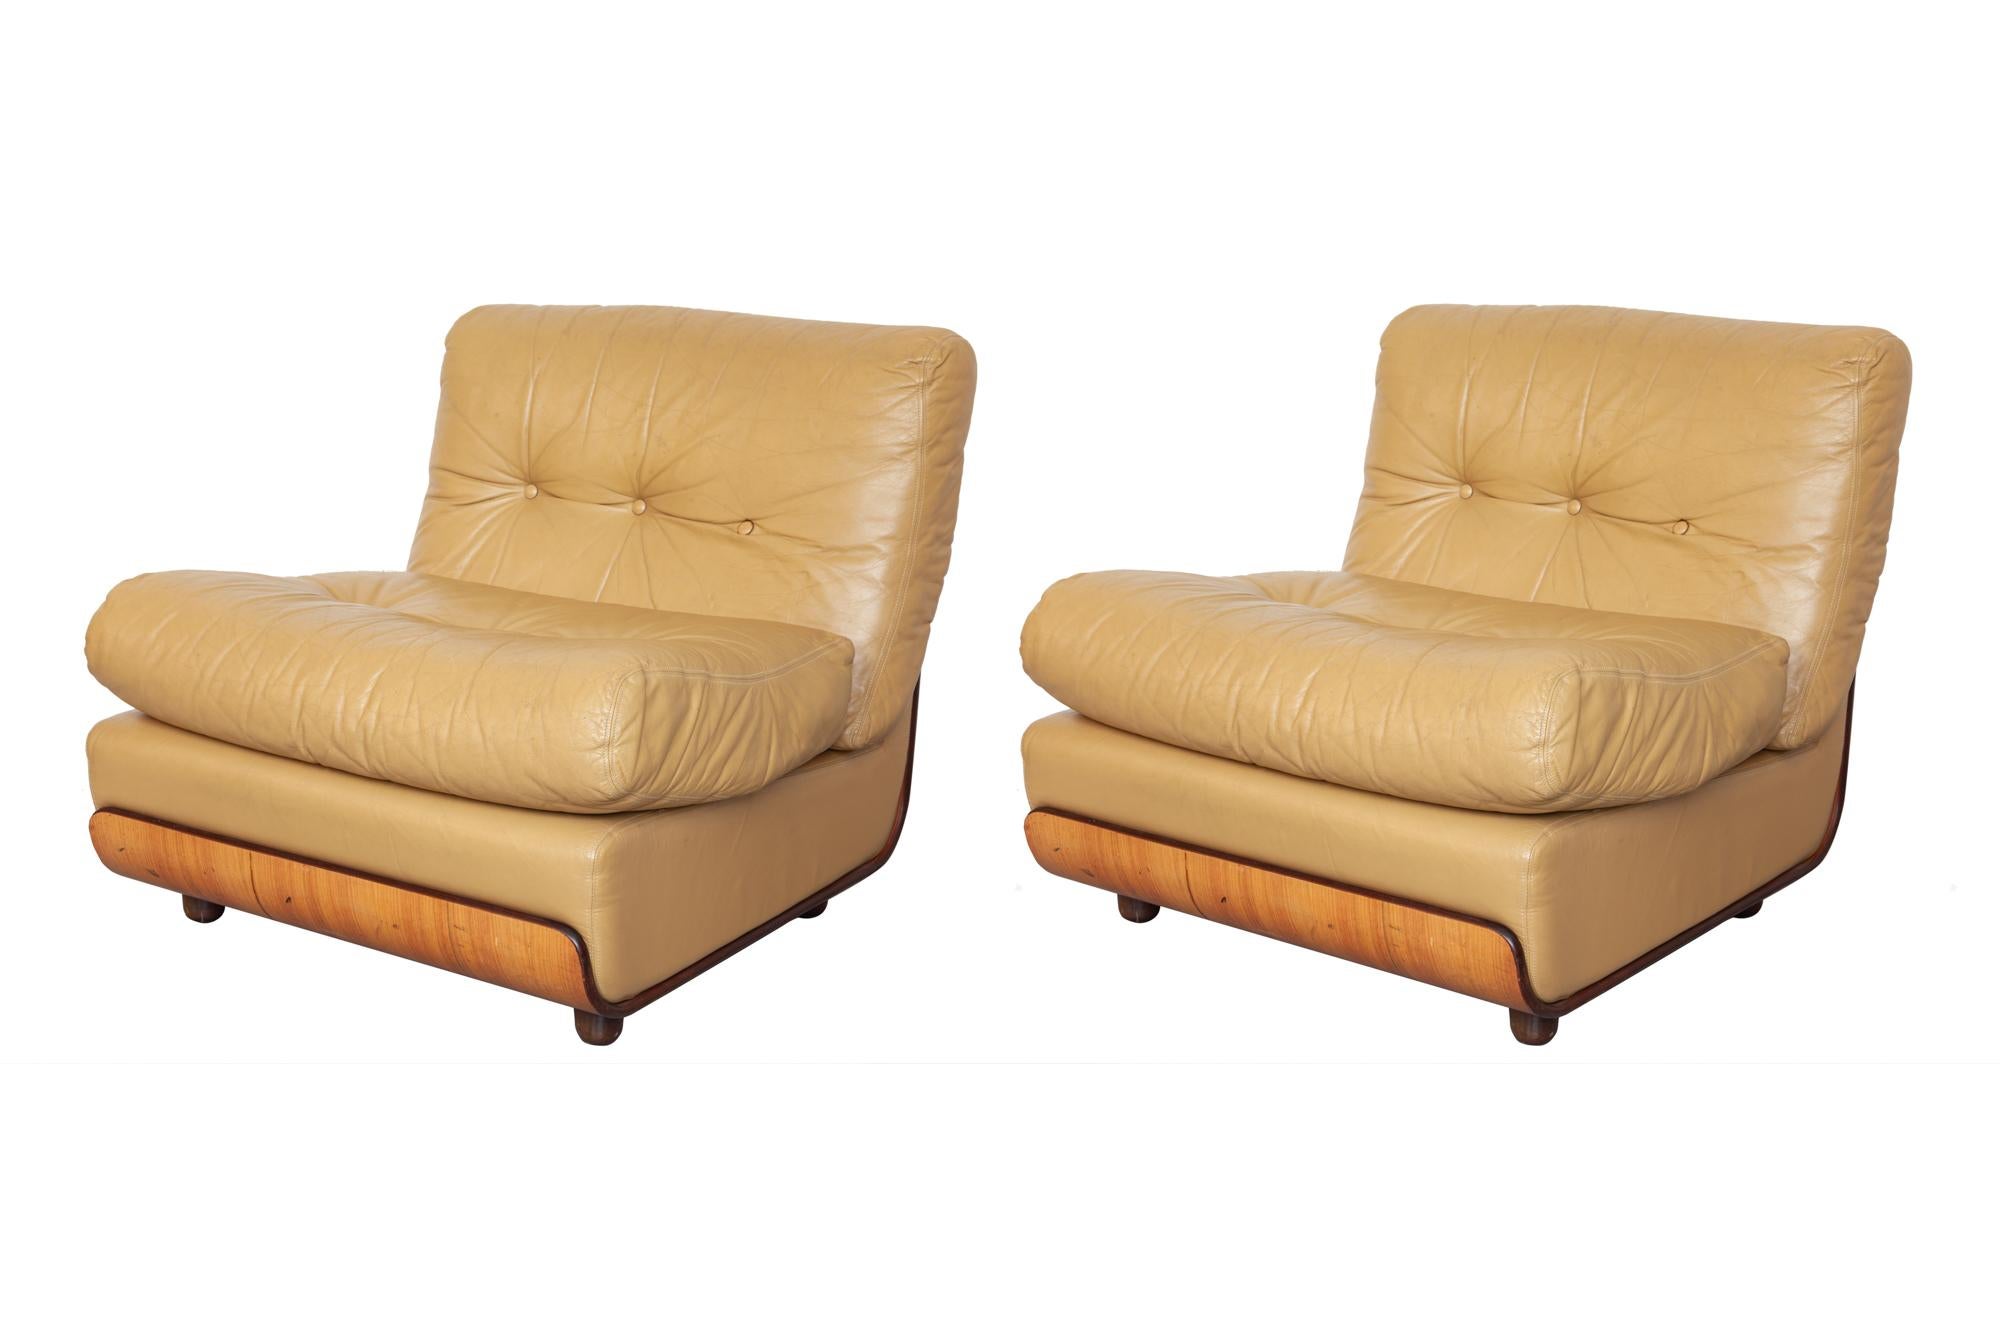 Set of two Italian lounge chairs marked Aemmeci Sezionne. Sand colored leather cushions and bentwood frame, rounded cylindrical wooden feet. The design is of a similar style to the classic Mario Bellini and Gaetano Pesce Amanta chairs.
Dimension: